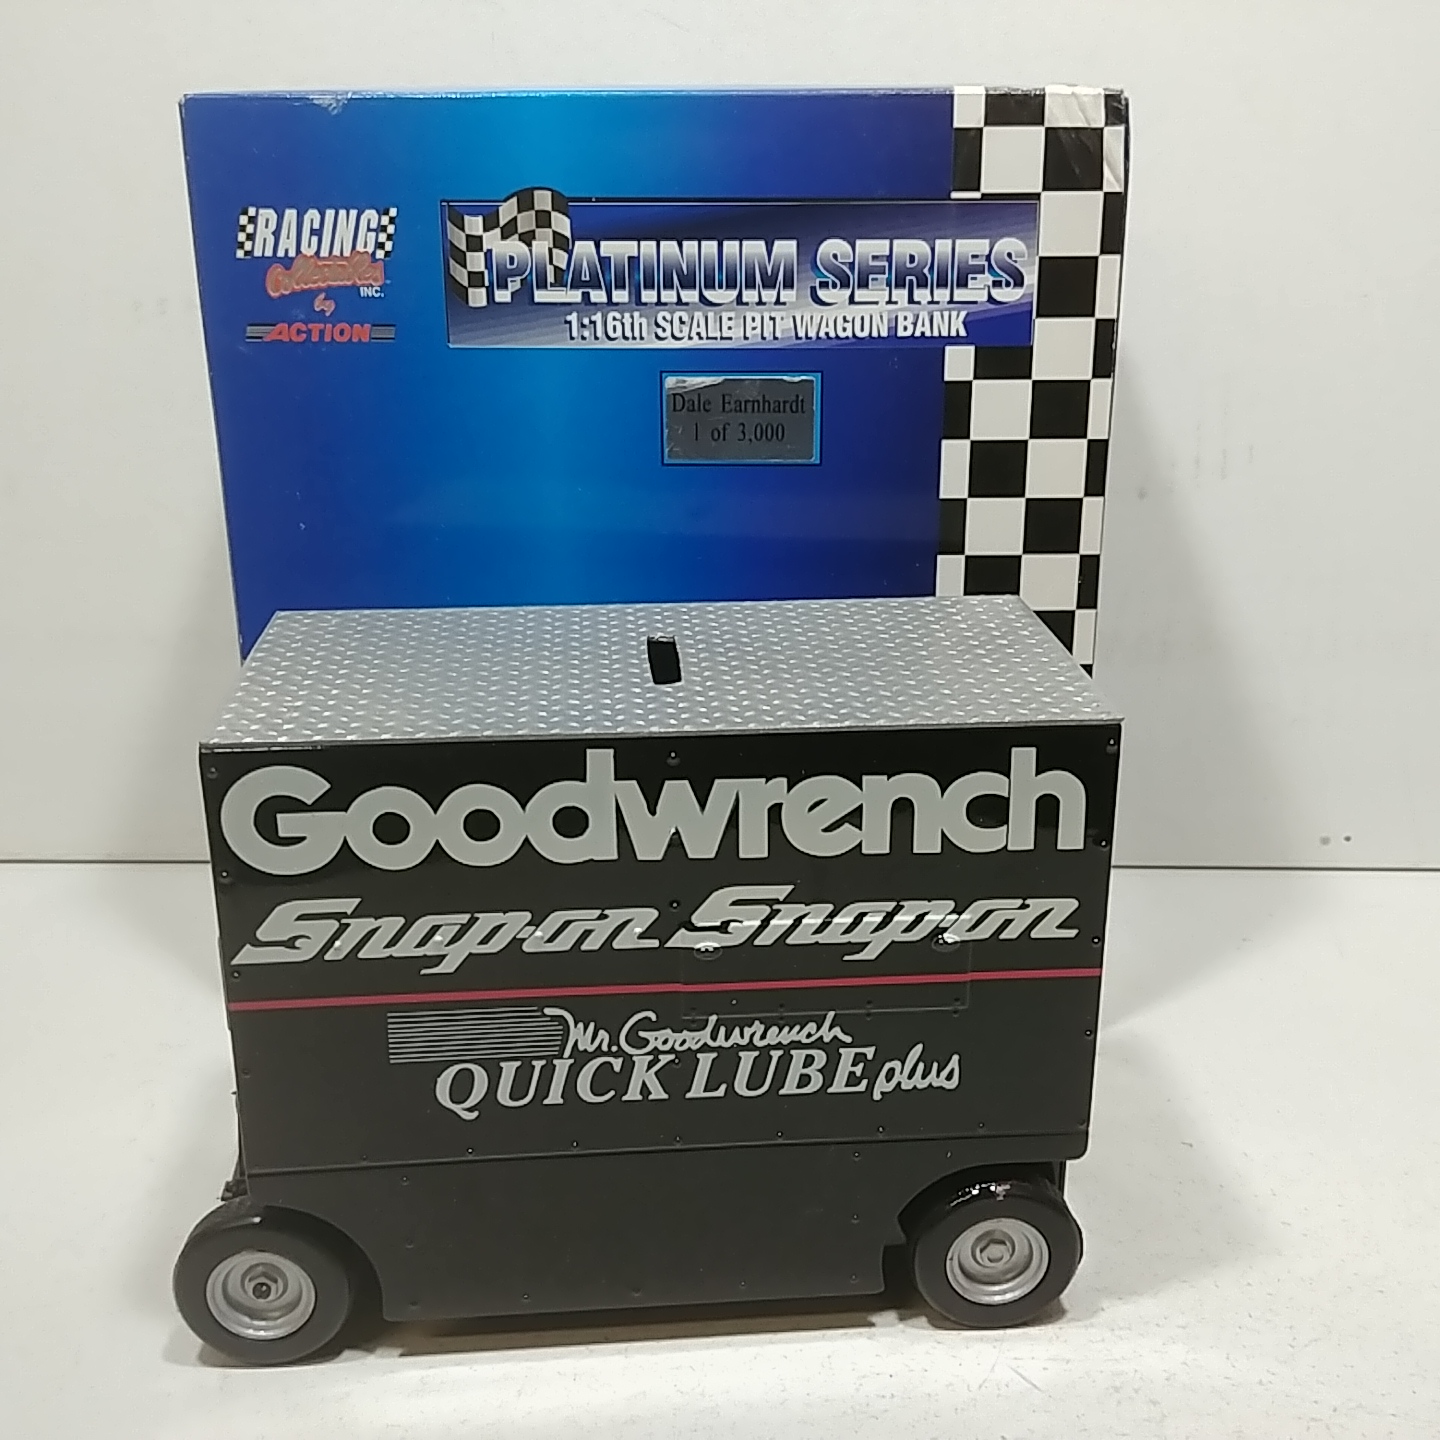 1994 Dale Earnhardt 1/16th Goodwrench Pit Wagon bank